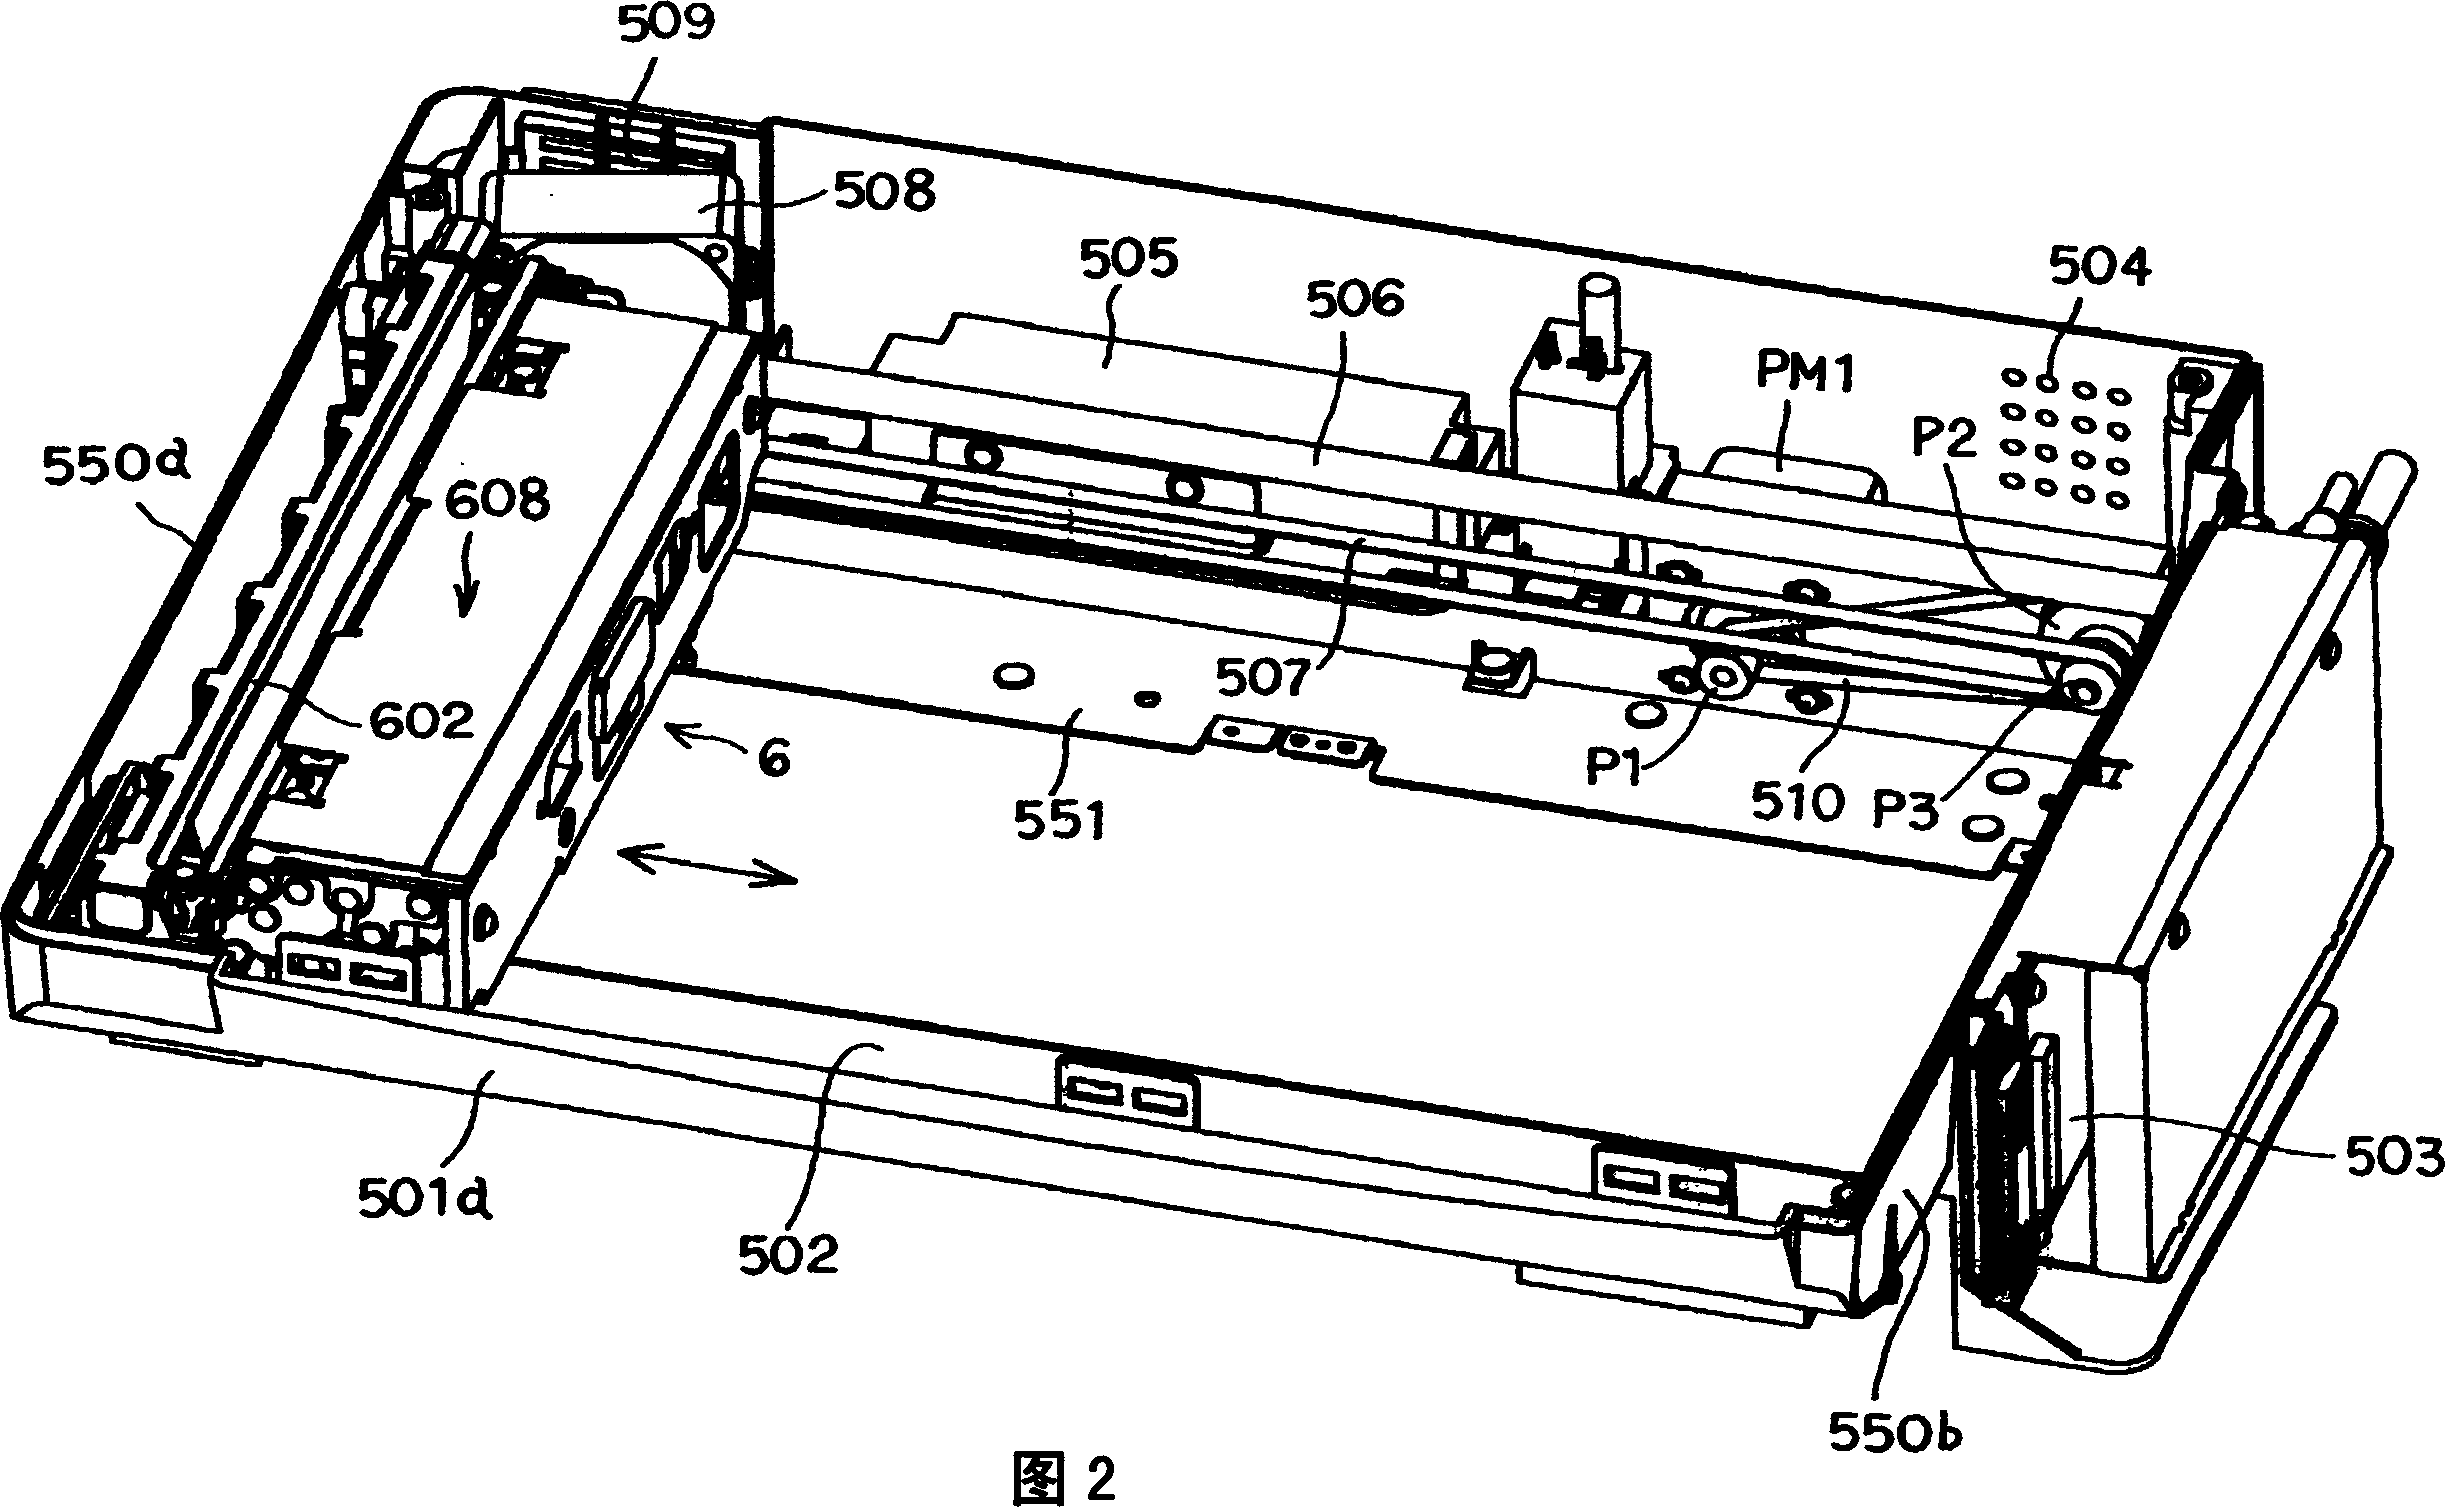 Image writing assembly and image writing apparatus